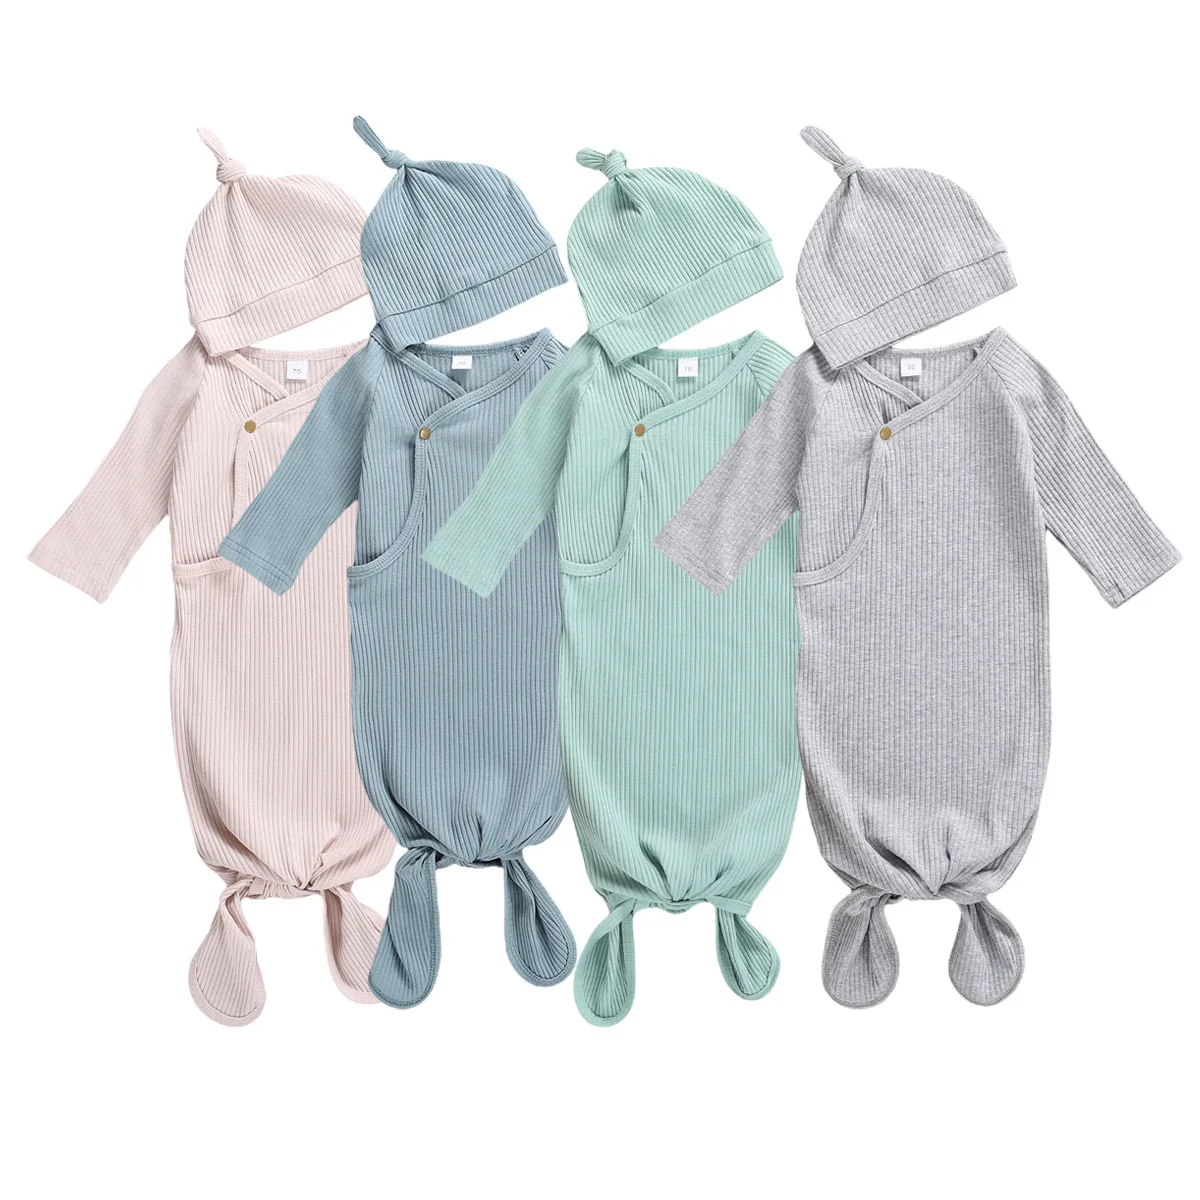 

2706 Newborn Baby Clothing Sleepwear Infant Toddler Boys Girls Nightgown Rompers Long Sleeve Clothes Overalls Pajamas, Picture shows